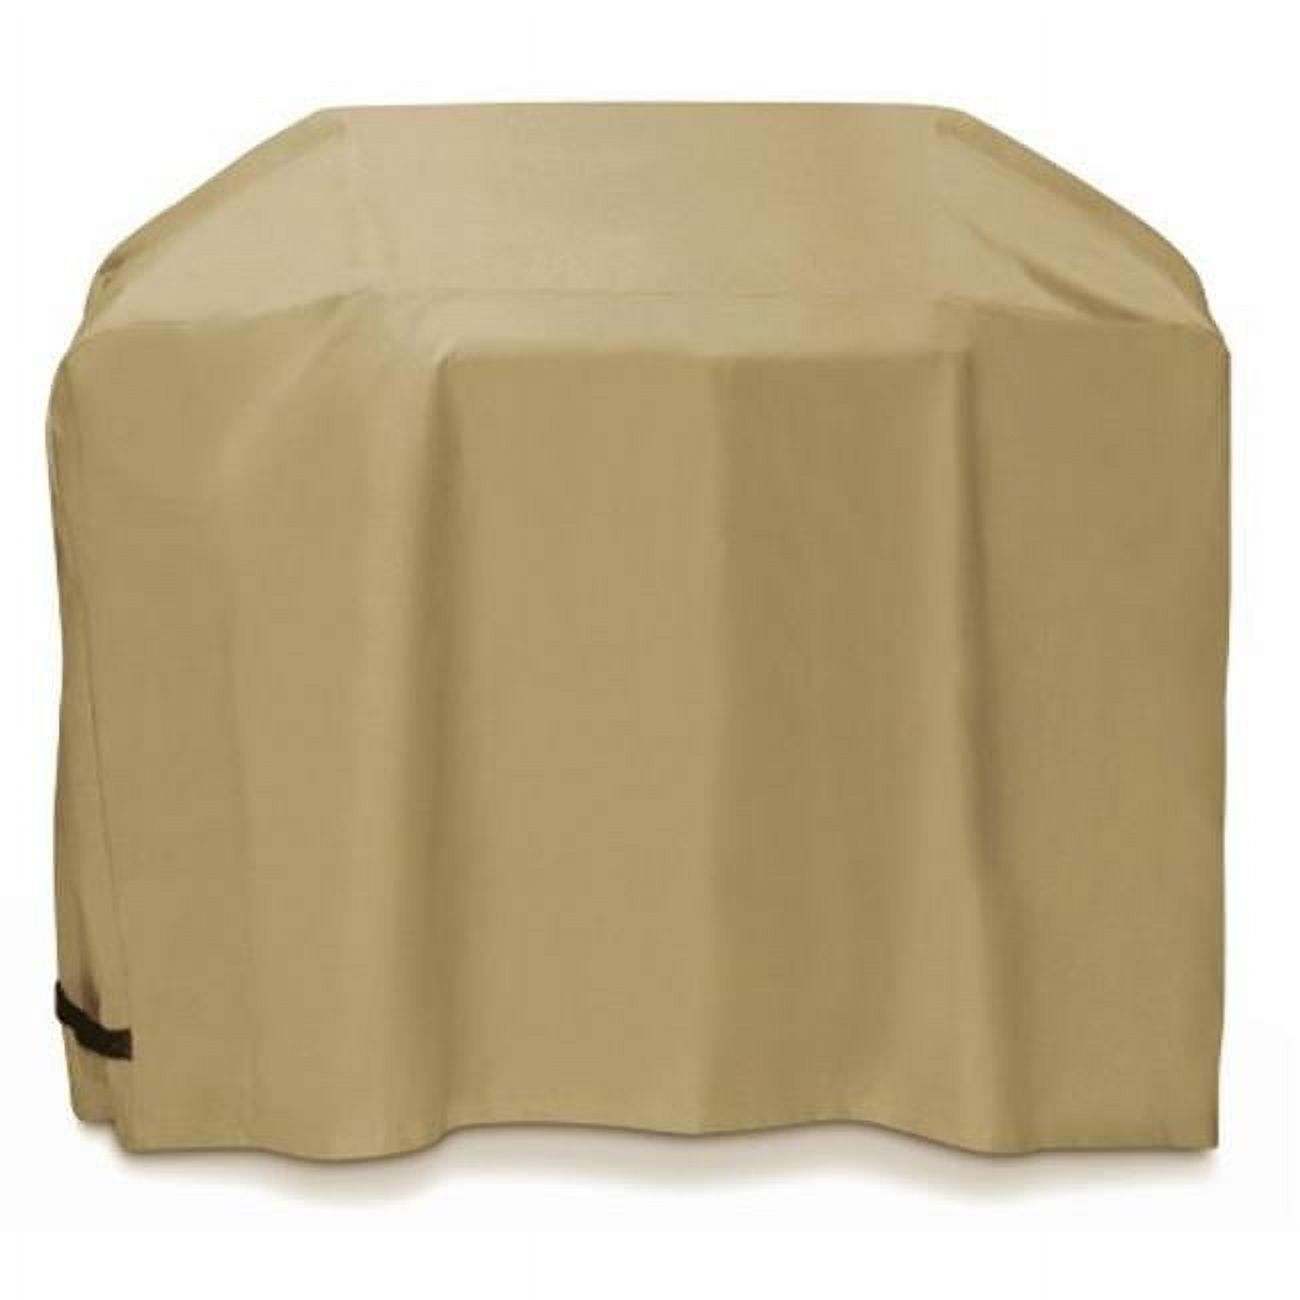 Two Dogs Designs 72 in. Cart Style Grill Cover - Khaki - image 1 of 3